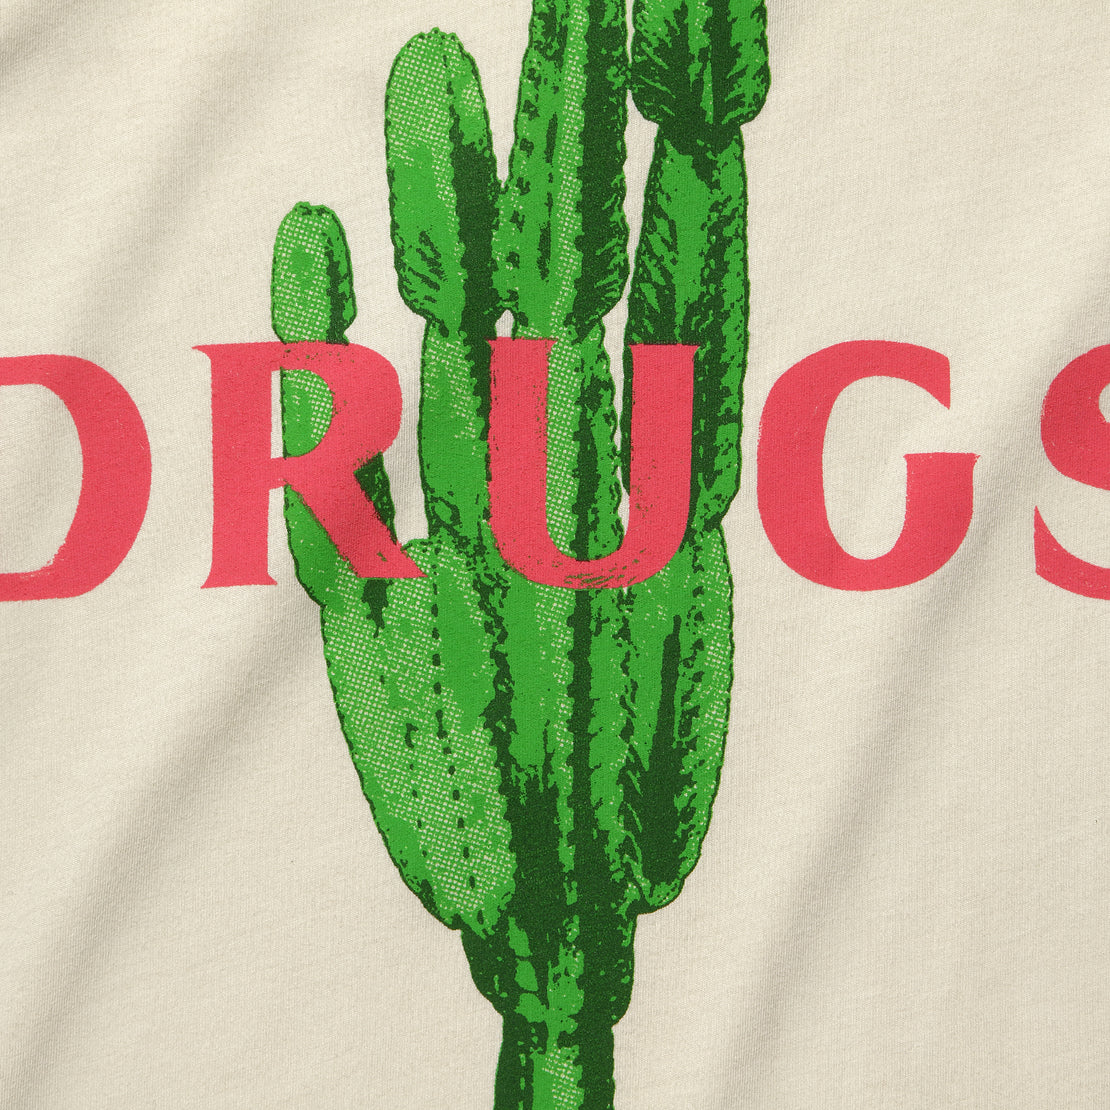 Drugs Tee - Vintage White - Imogene + Willie - STAG Provisions - Tops - S/S Tee - Graphic